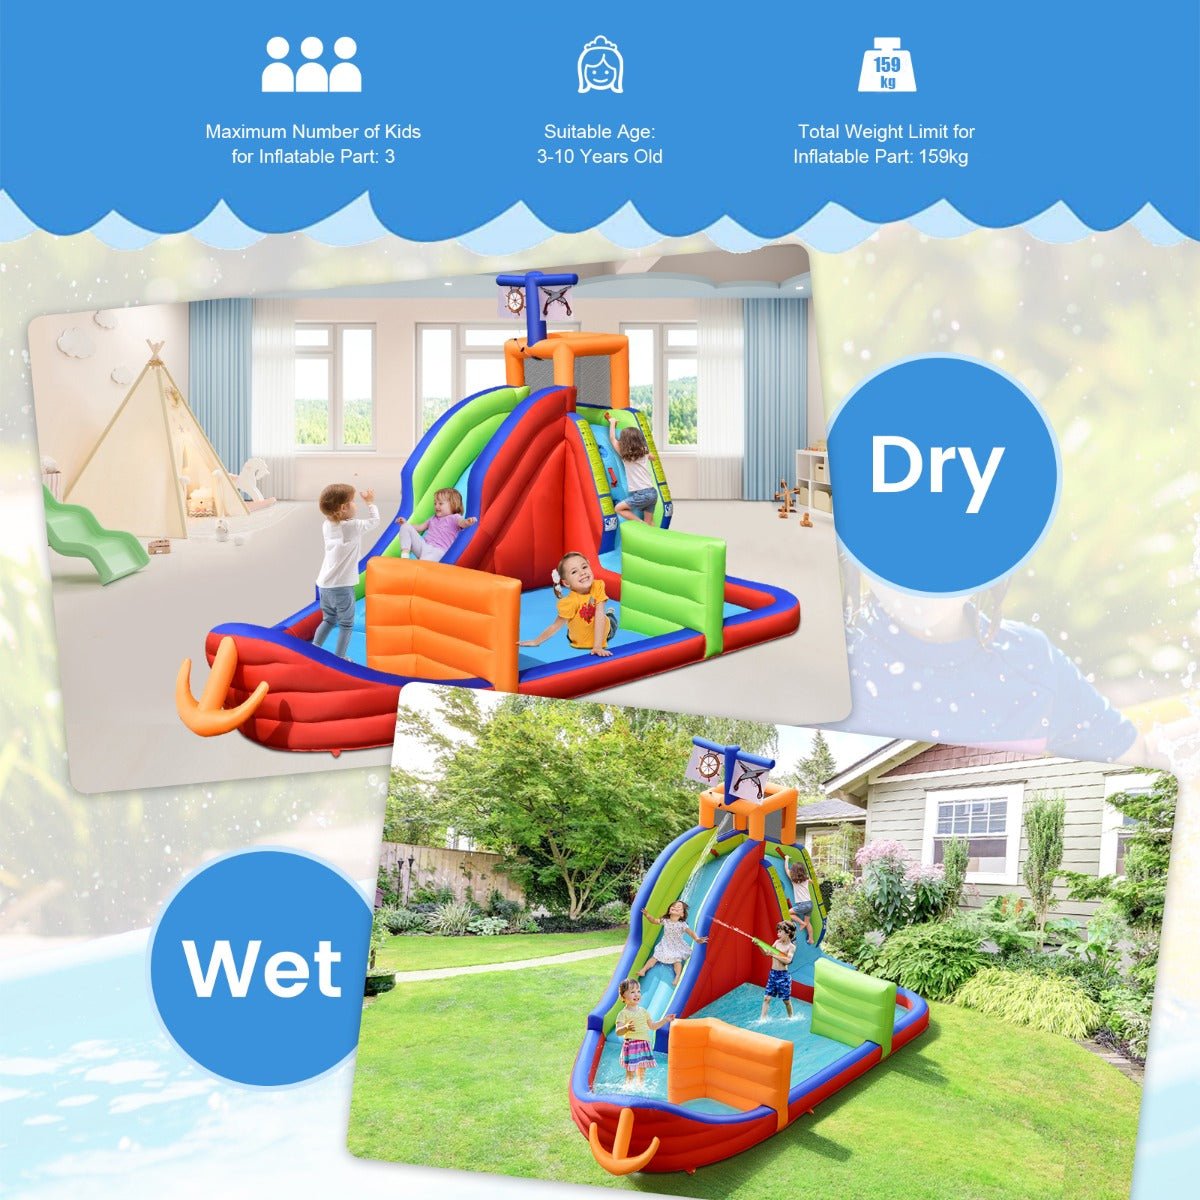 Backyard Oasis: 6-in-1 Inflatable Waterslide with Extended Slide